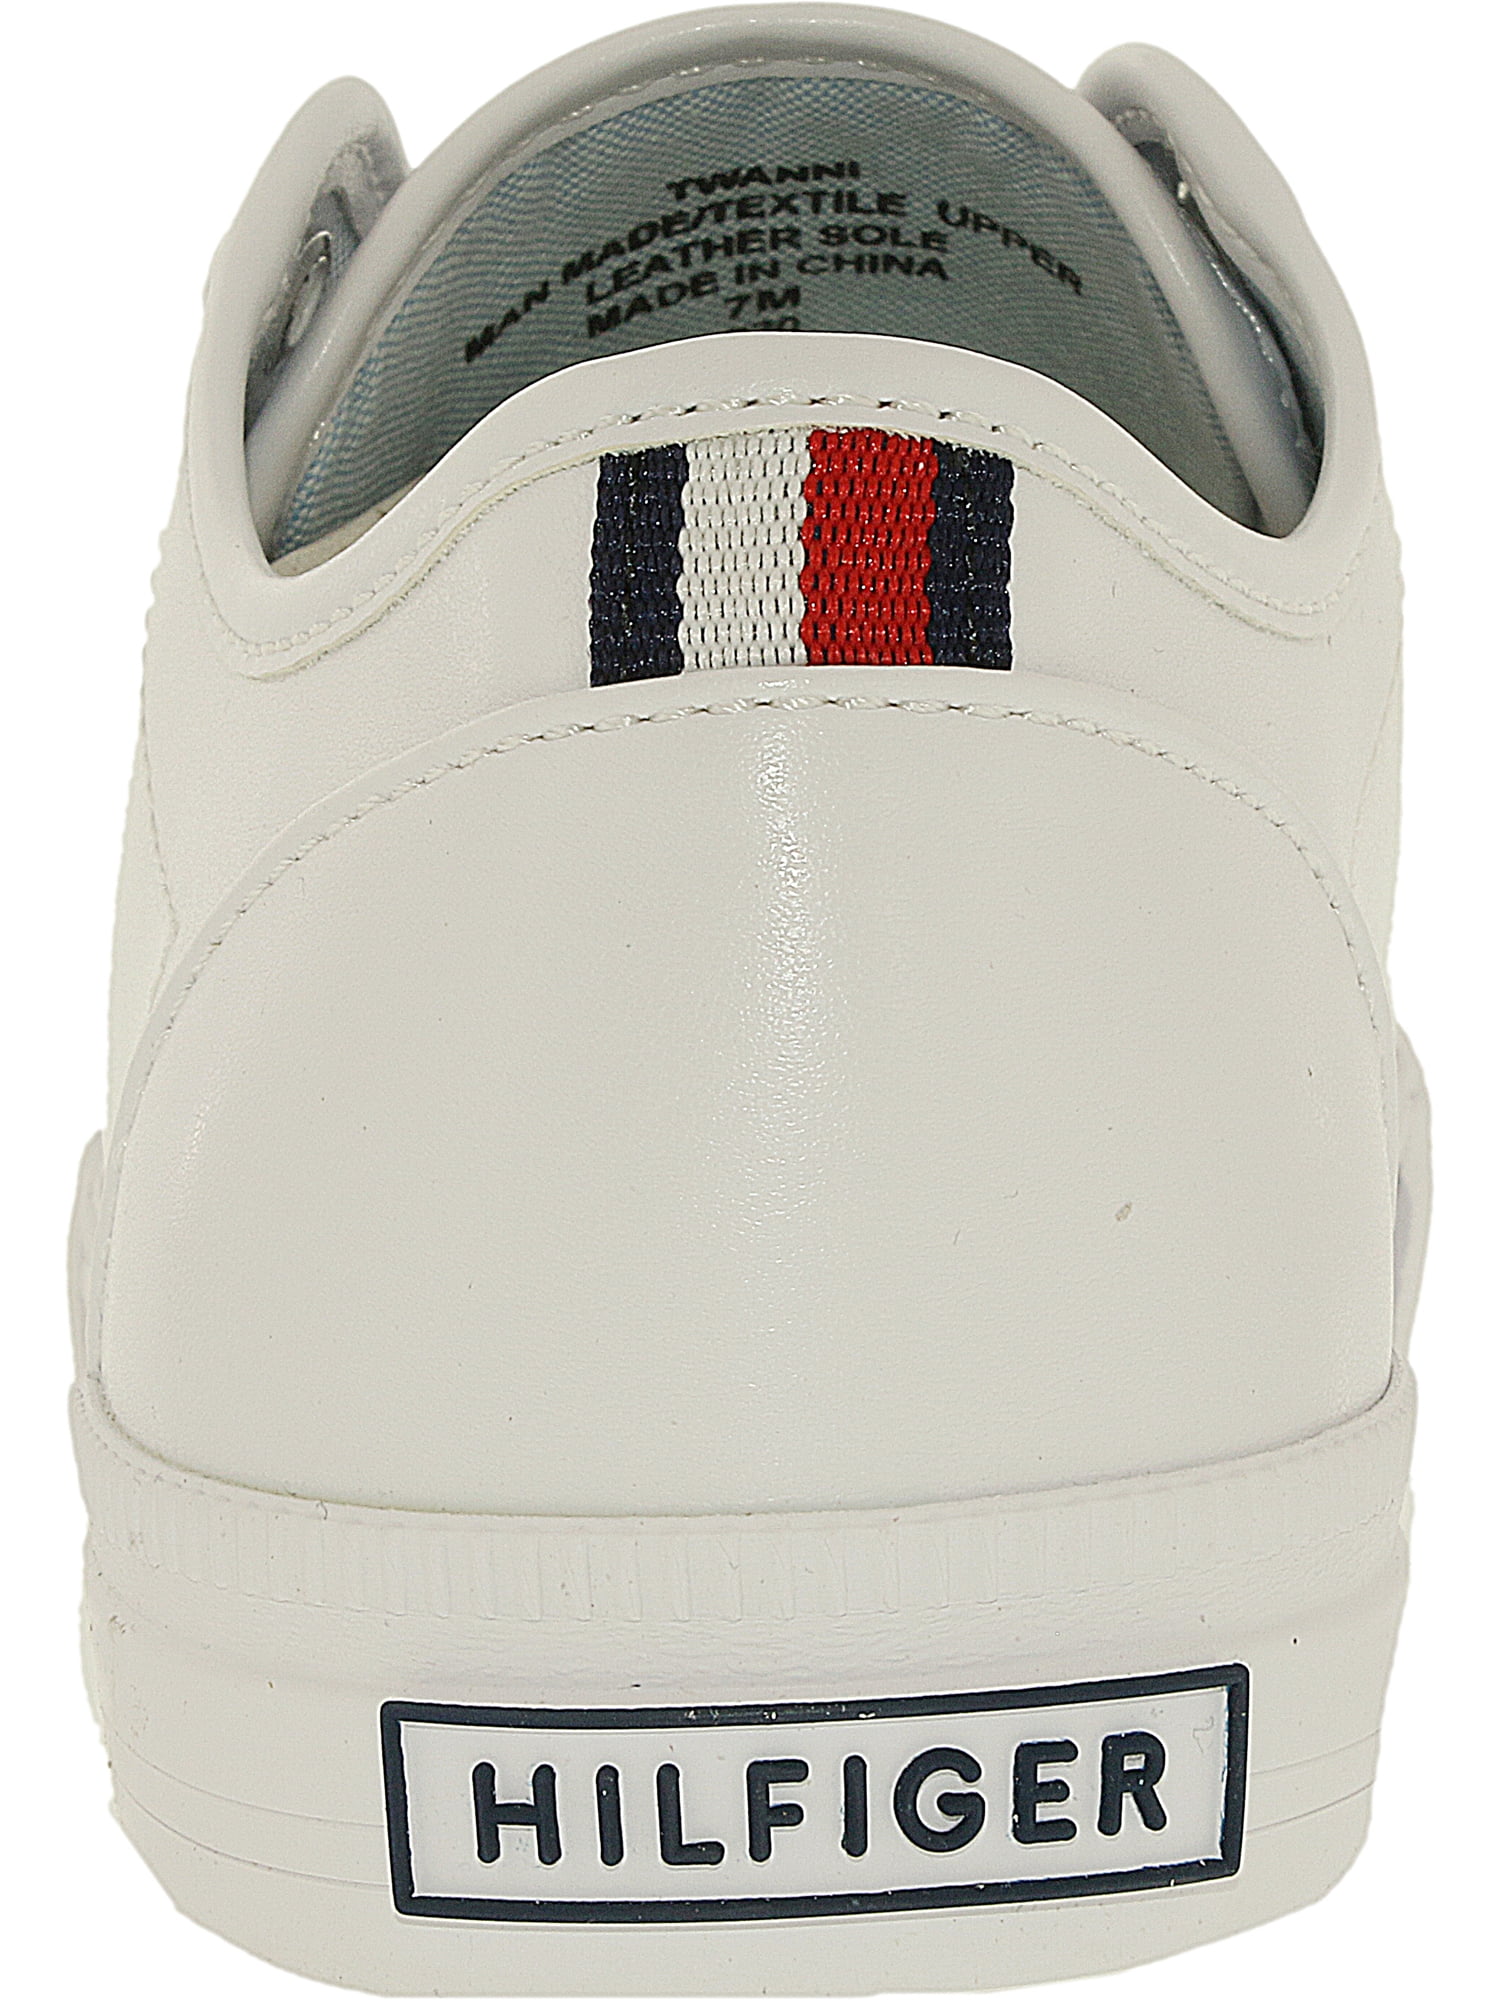 Tommy Hilfiger Women's Anni White Multi Ankle-High Leather Fashion 